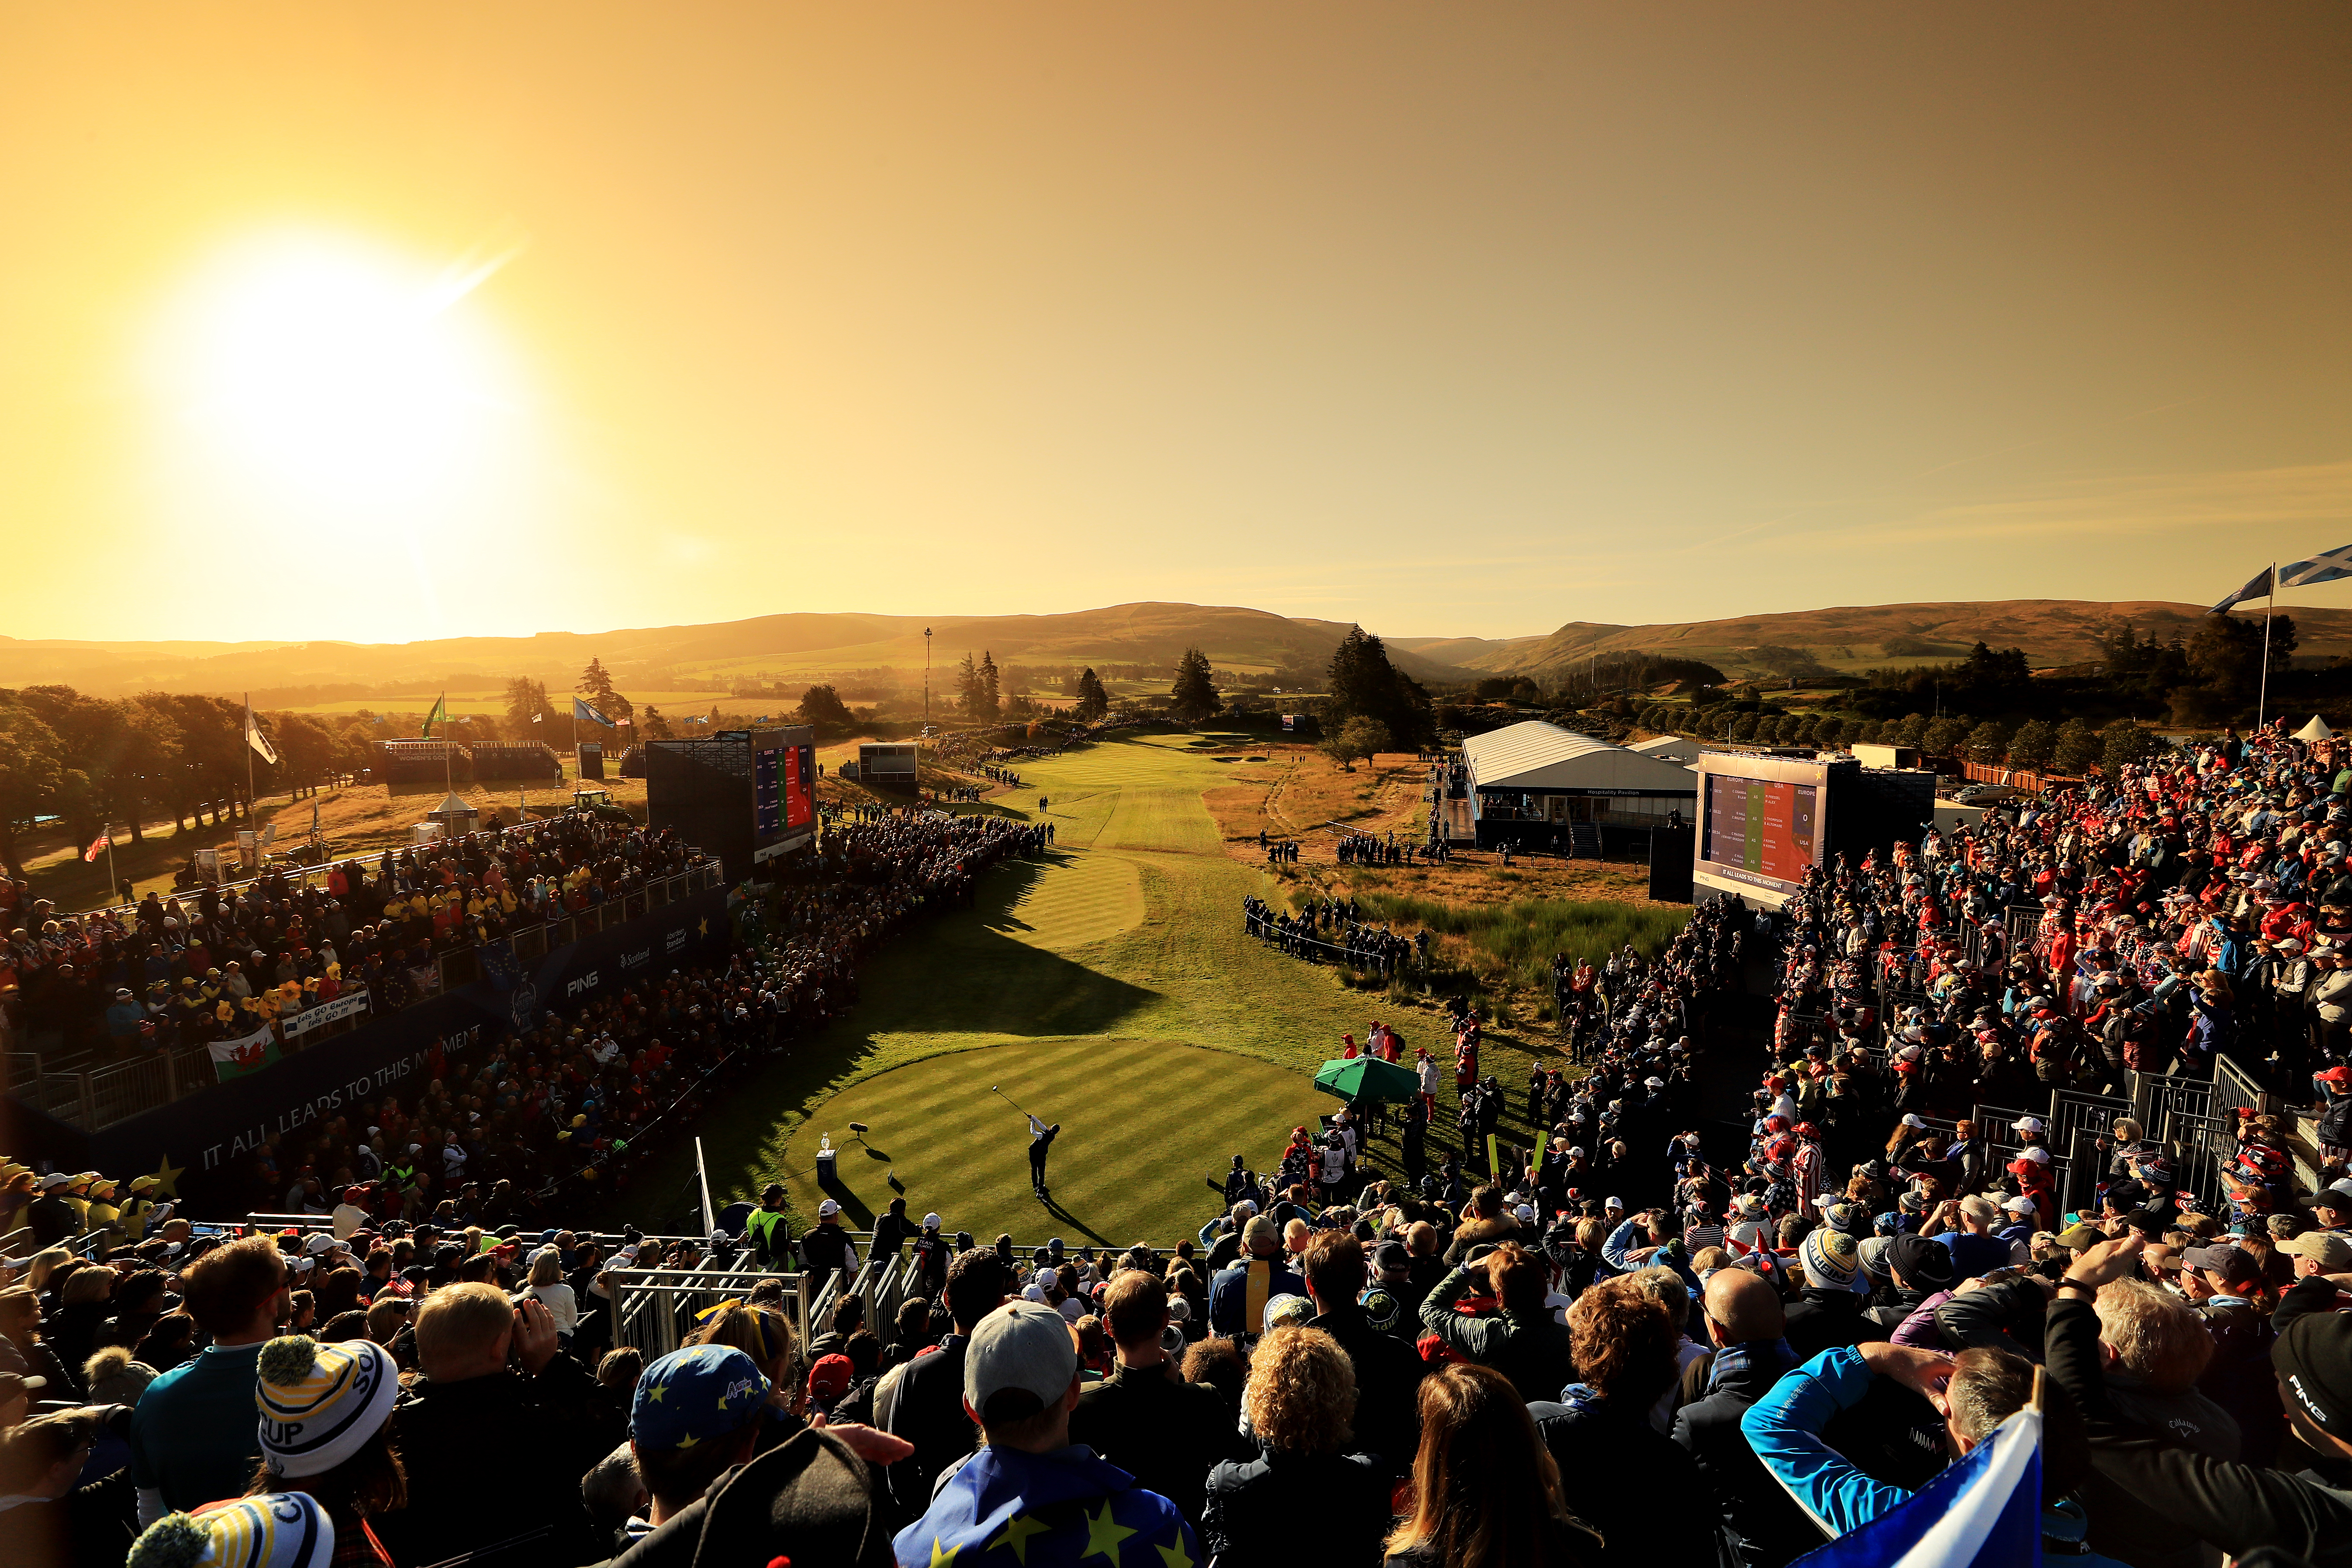 Sunrise over the first tee on the first day at the Solheim Cup at Gleneagles.